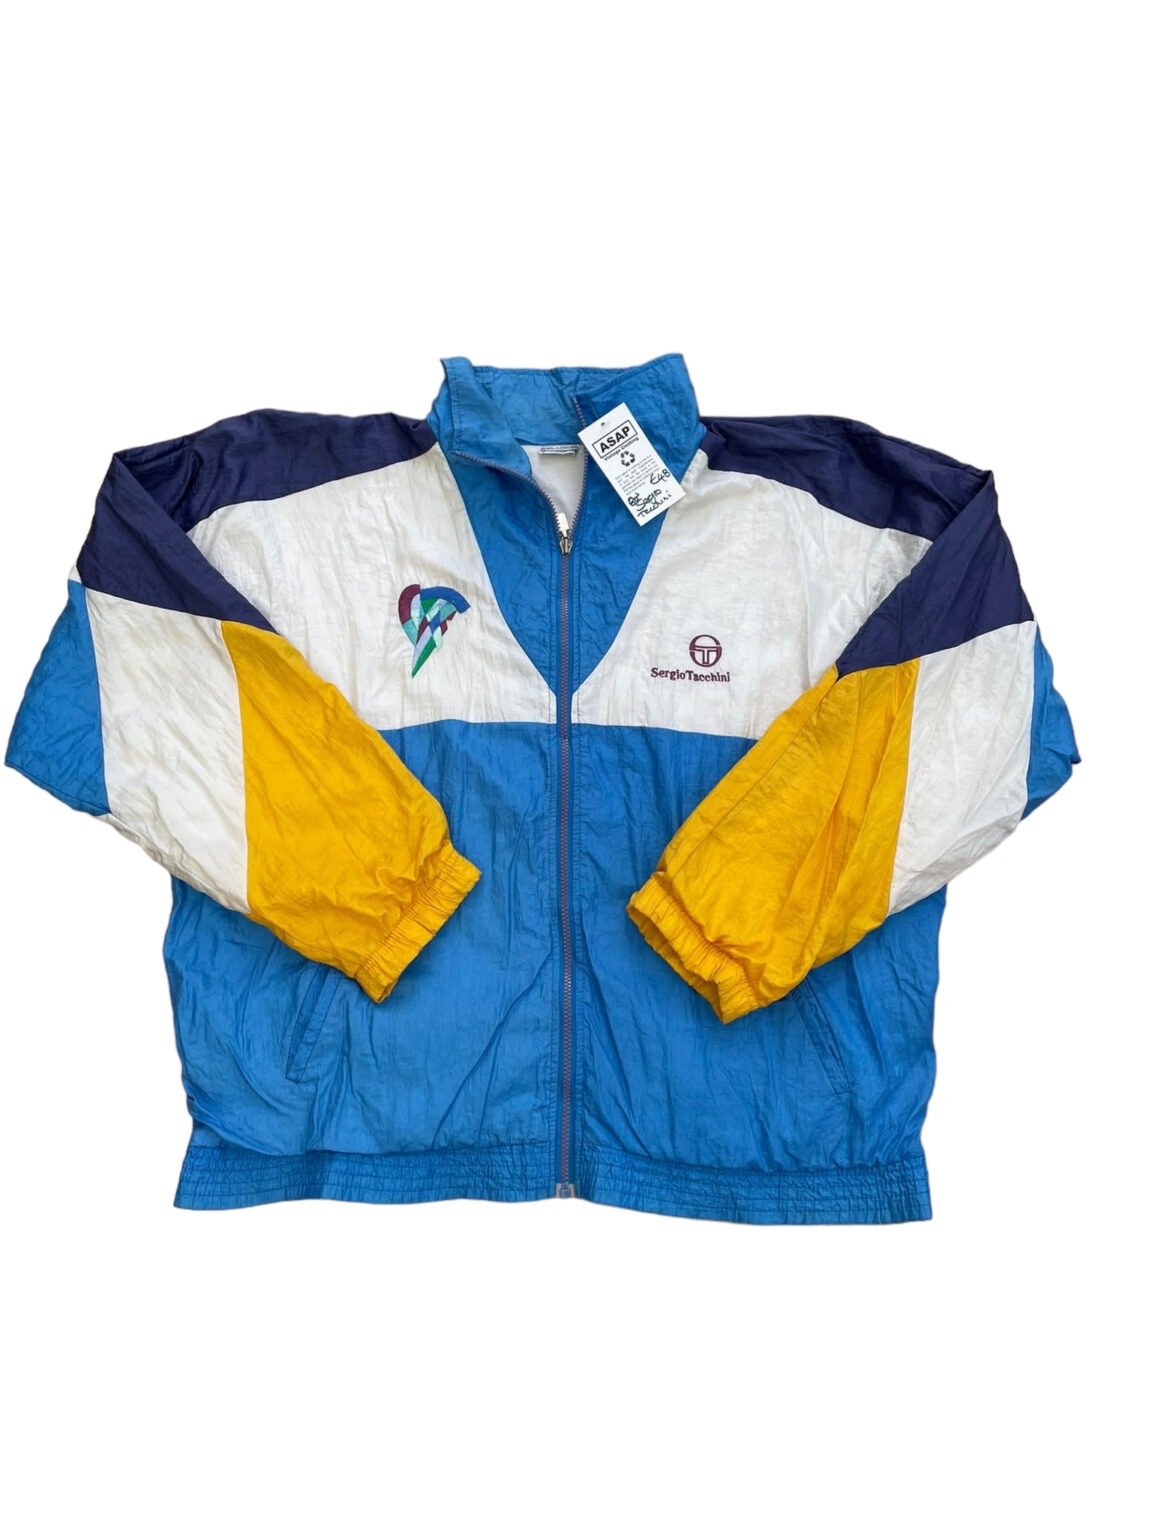 Sergio Tacchini 1980s Shell Suit Track Jacket – ASAP Vintage Clothing